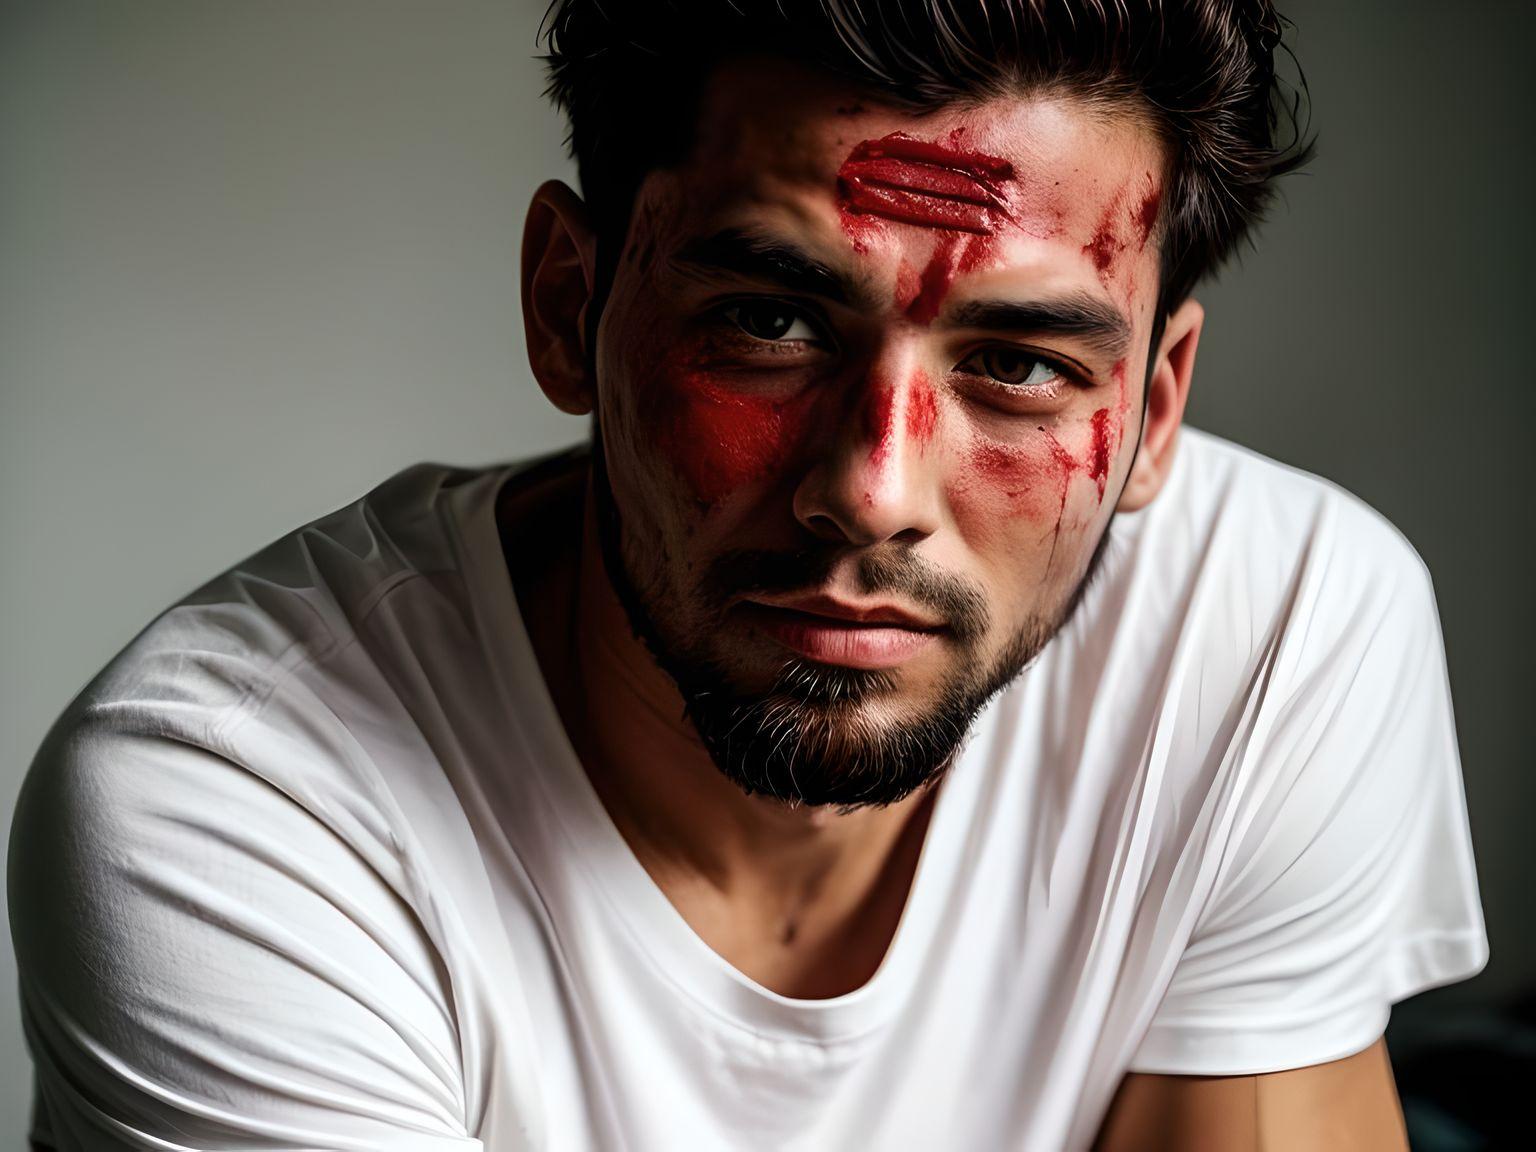 A man was wearing a white T-shirt with blood on it and some scars on his face